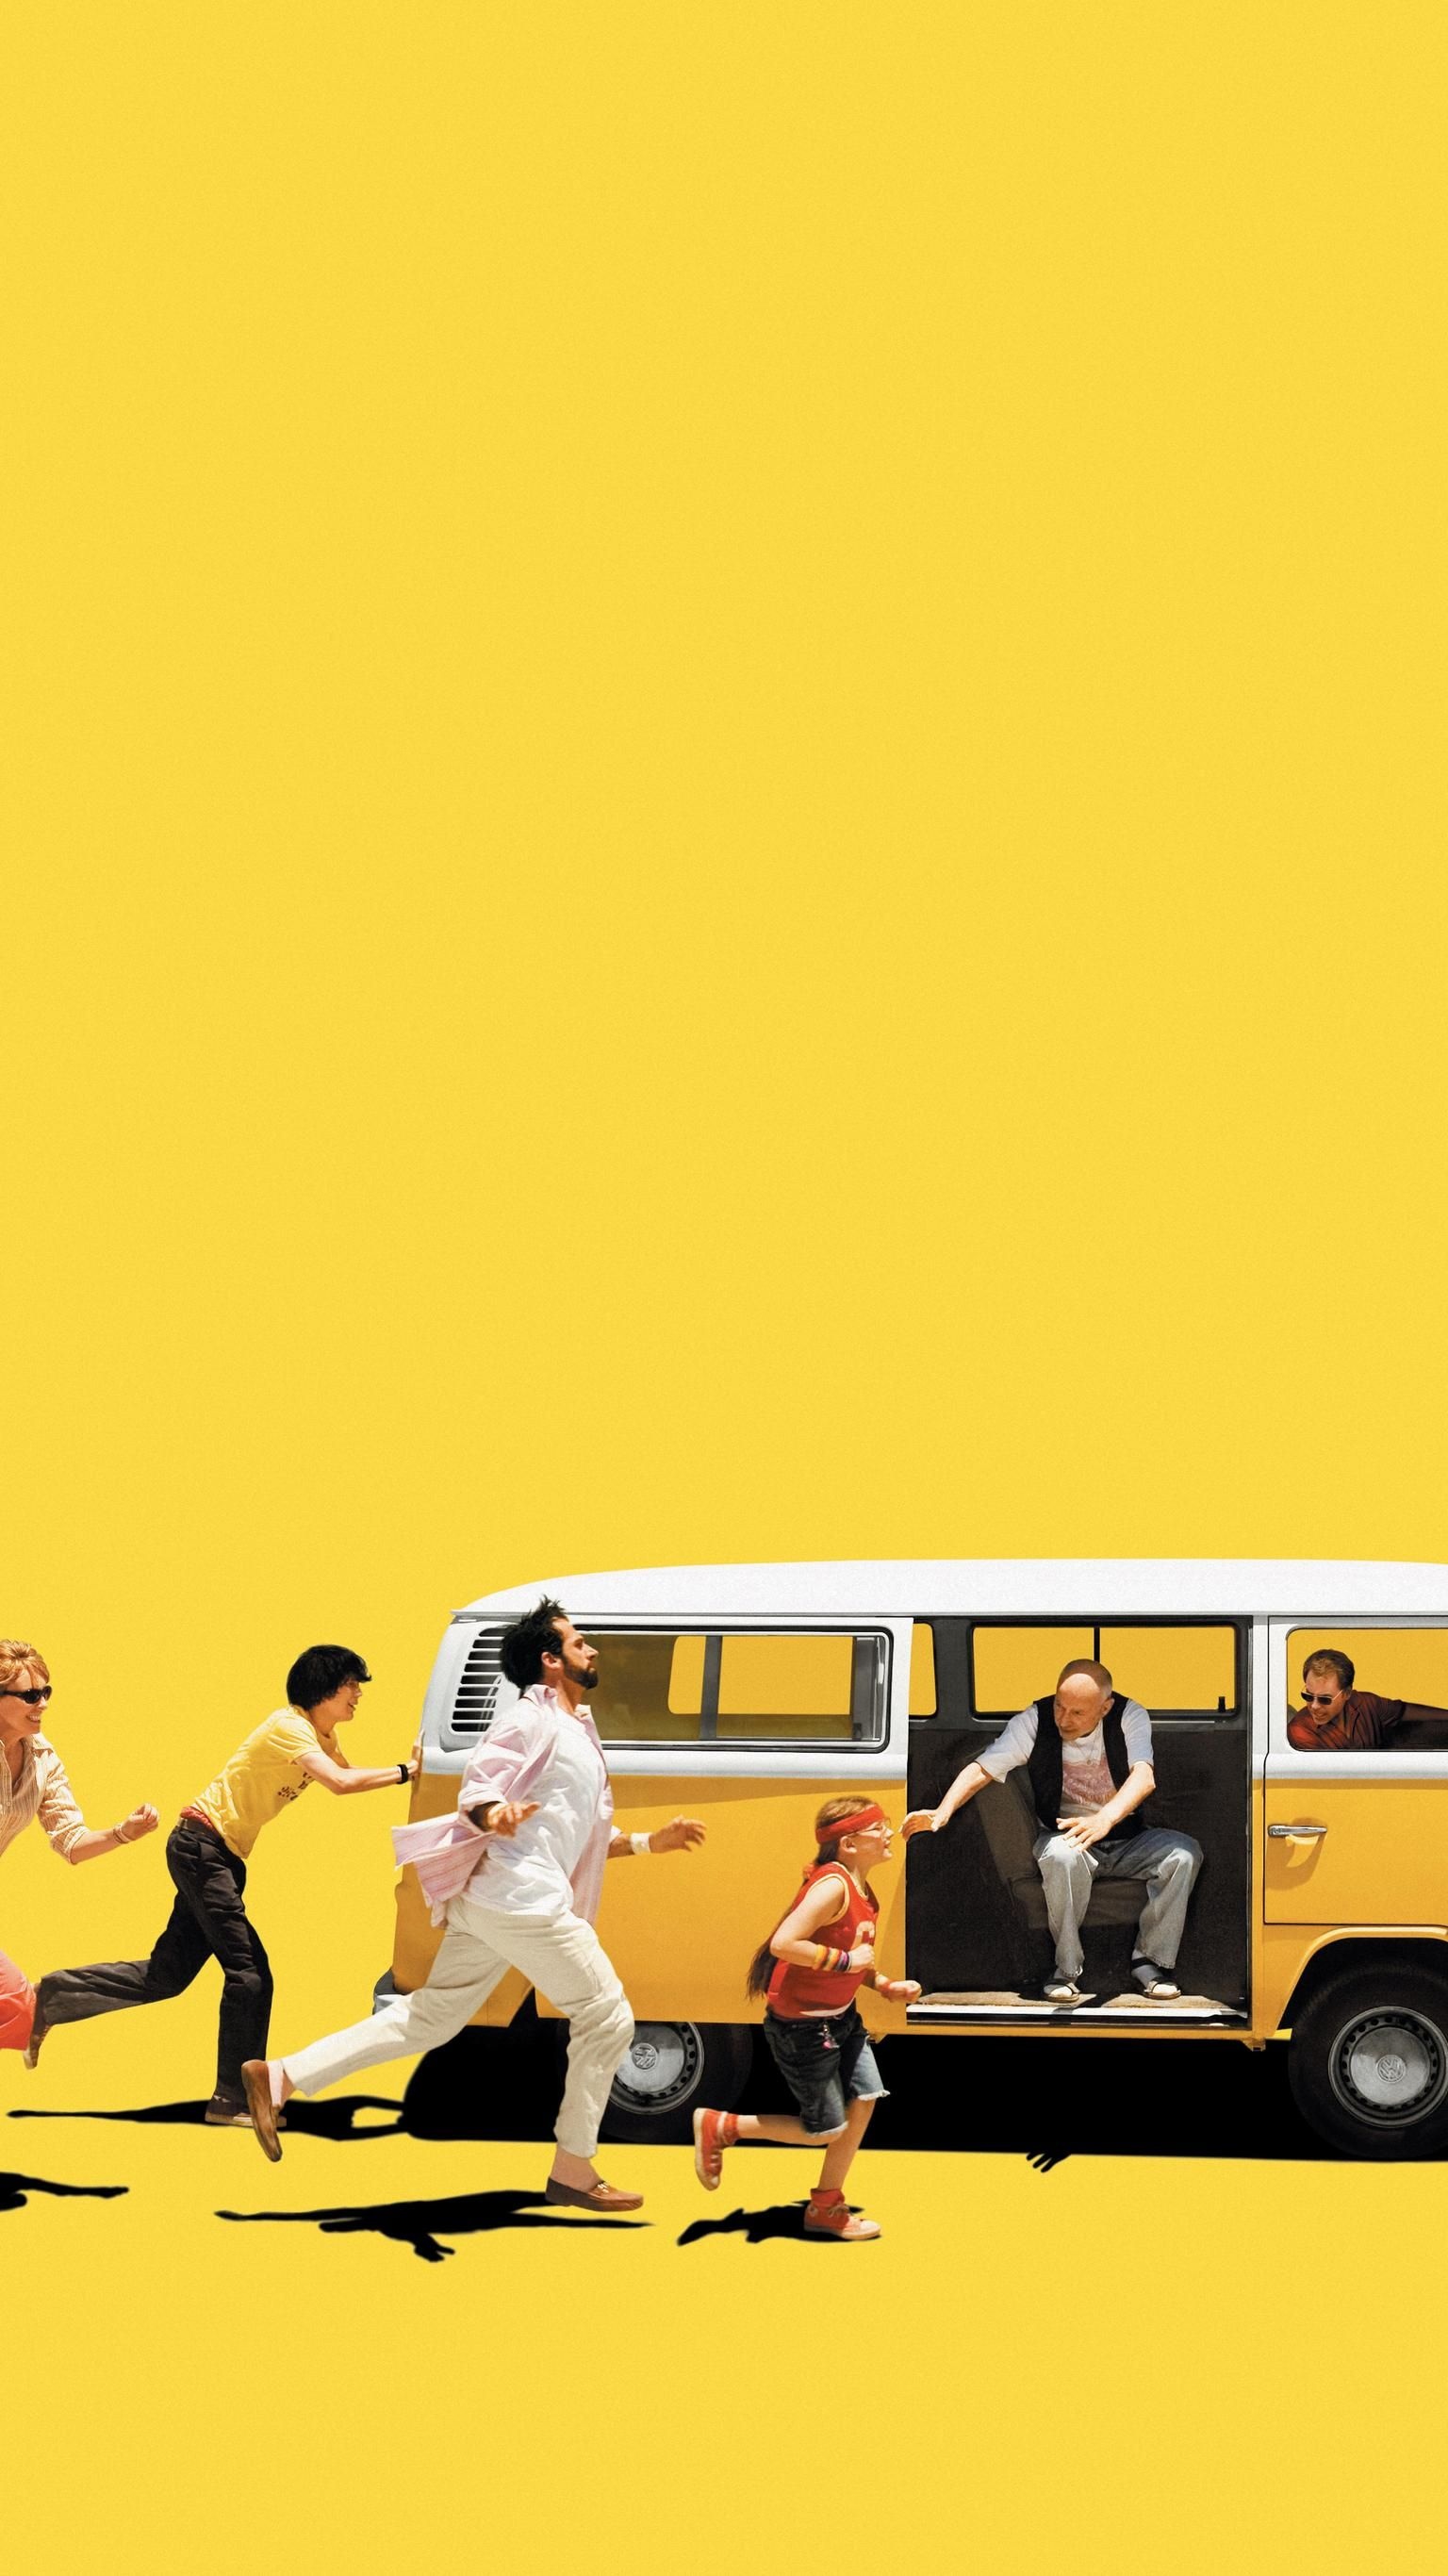 Little Miss Sunshine: Members of a family taking the youngest to compete in a child beauty pageant. 1540x2740 HD Wallpaper.